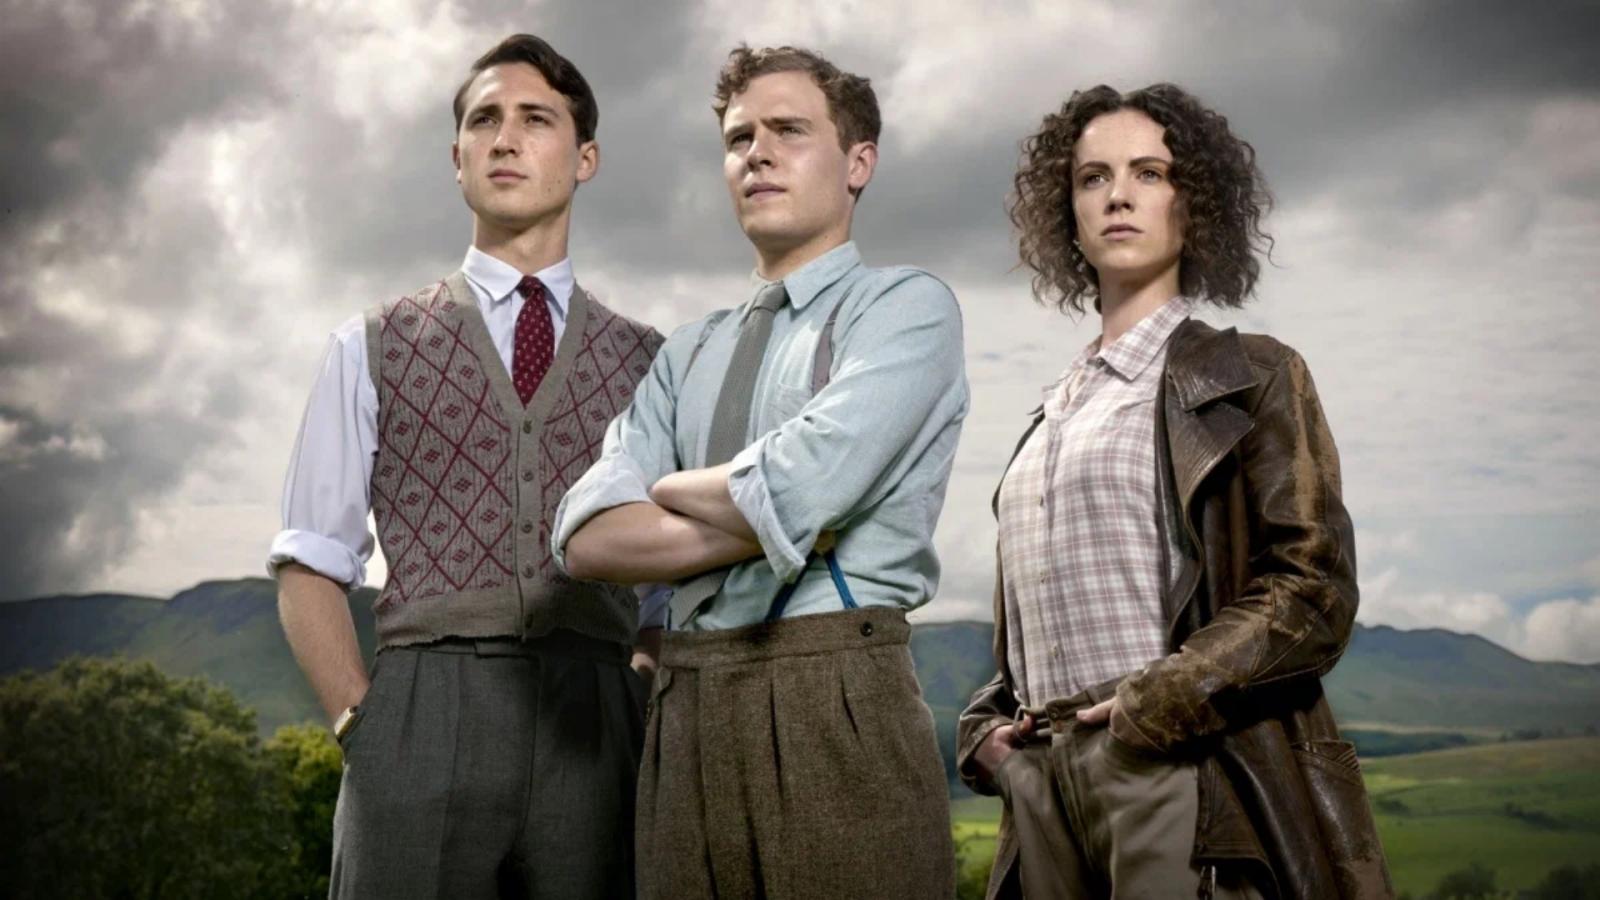 10 Light-Hearted Period Dramas to Watch Instead of Outlander - image 4